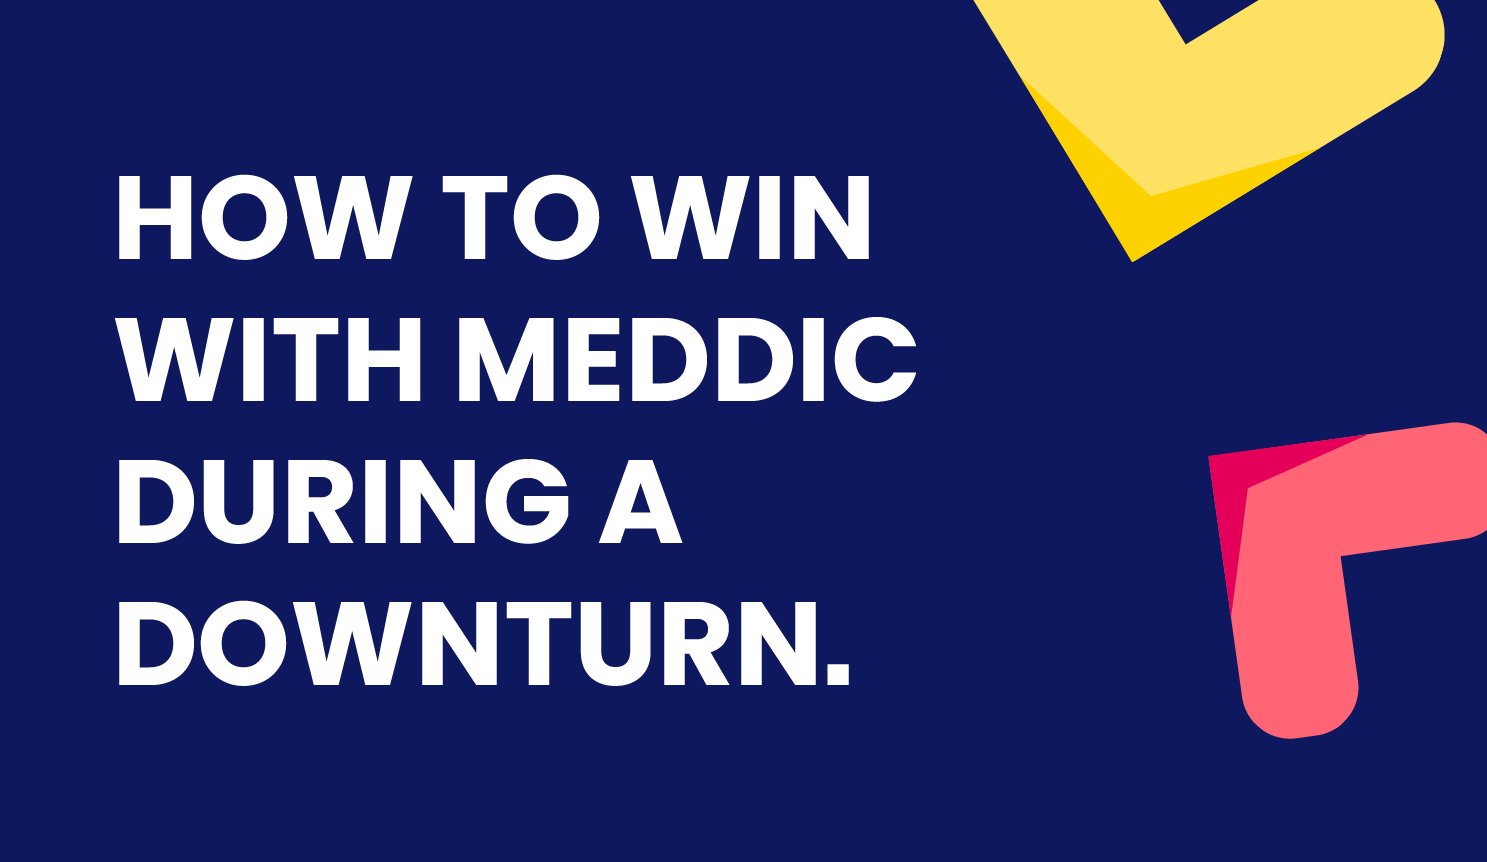 How to Win With MEDDIC During a Downturn